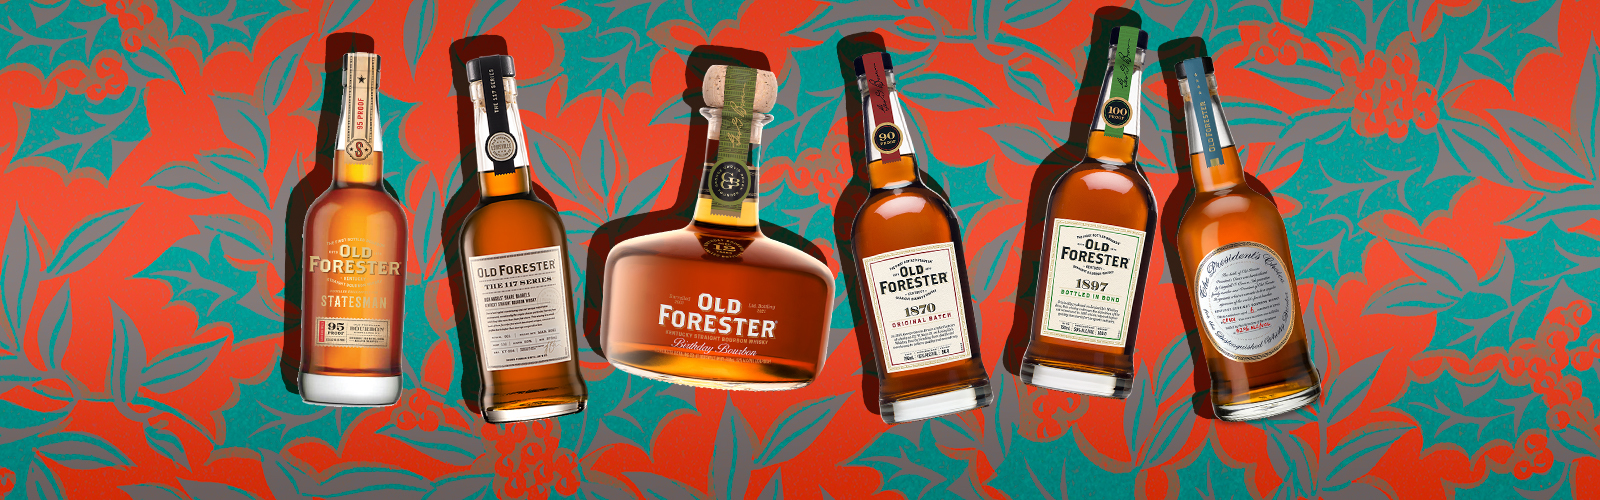 Old Forester Ranking